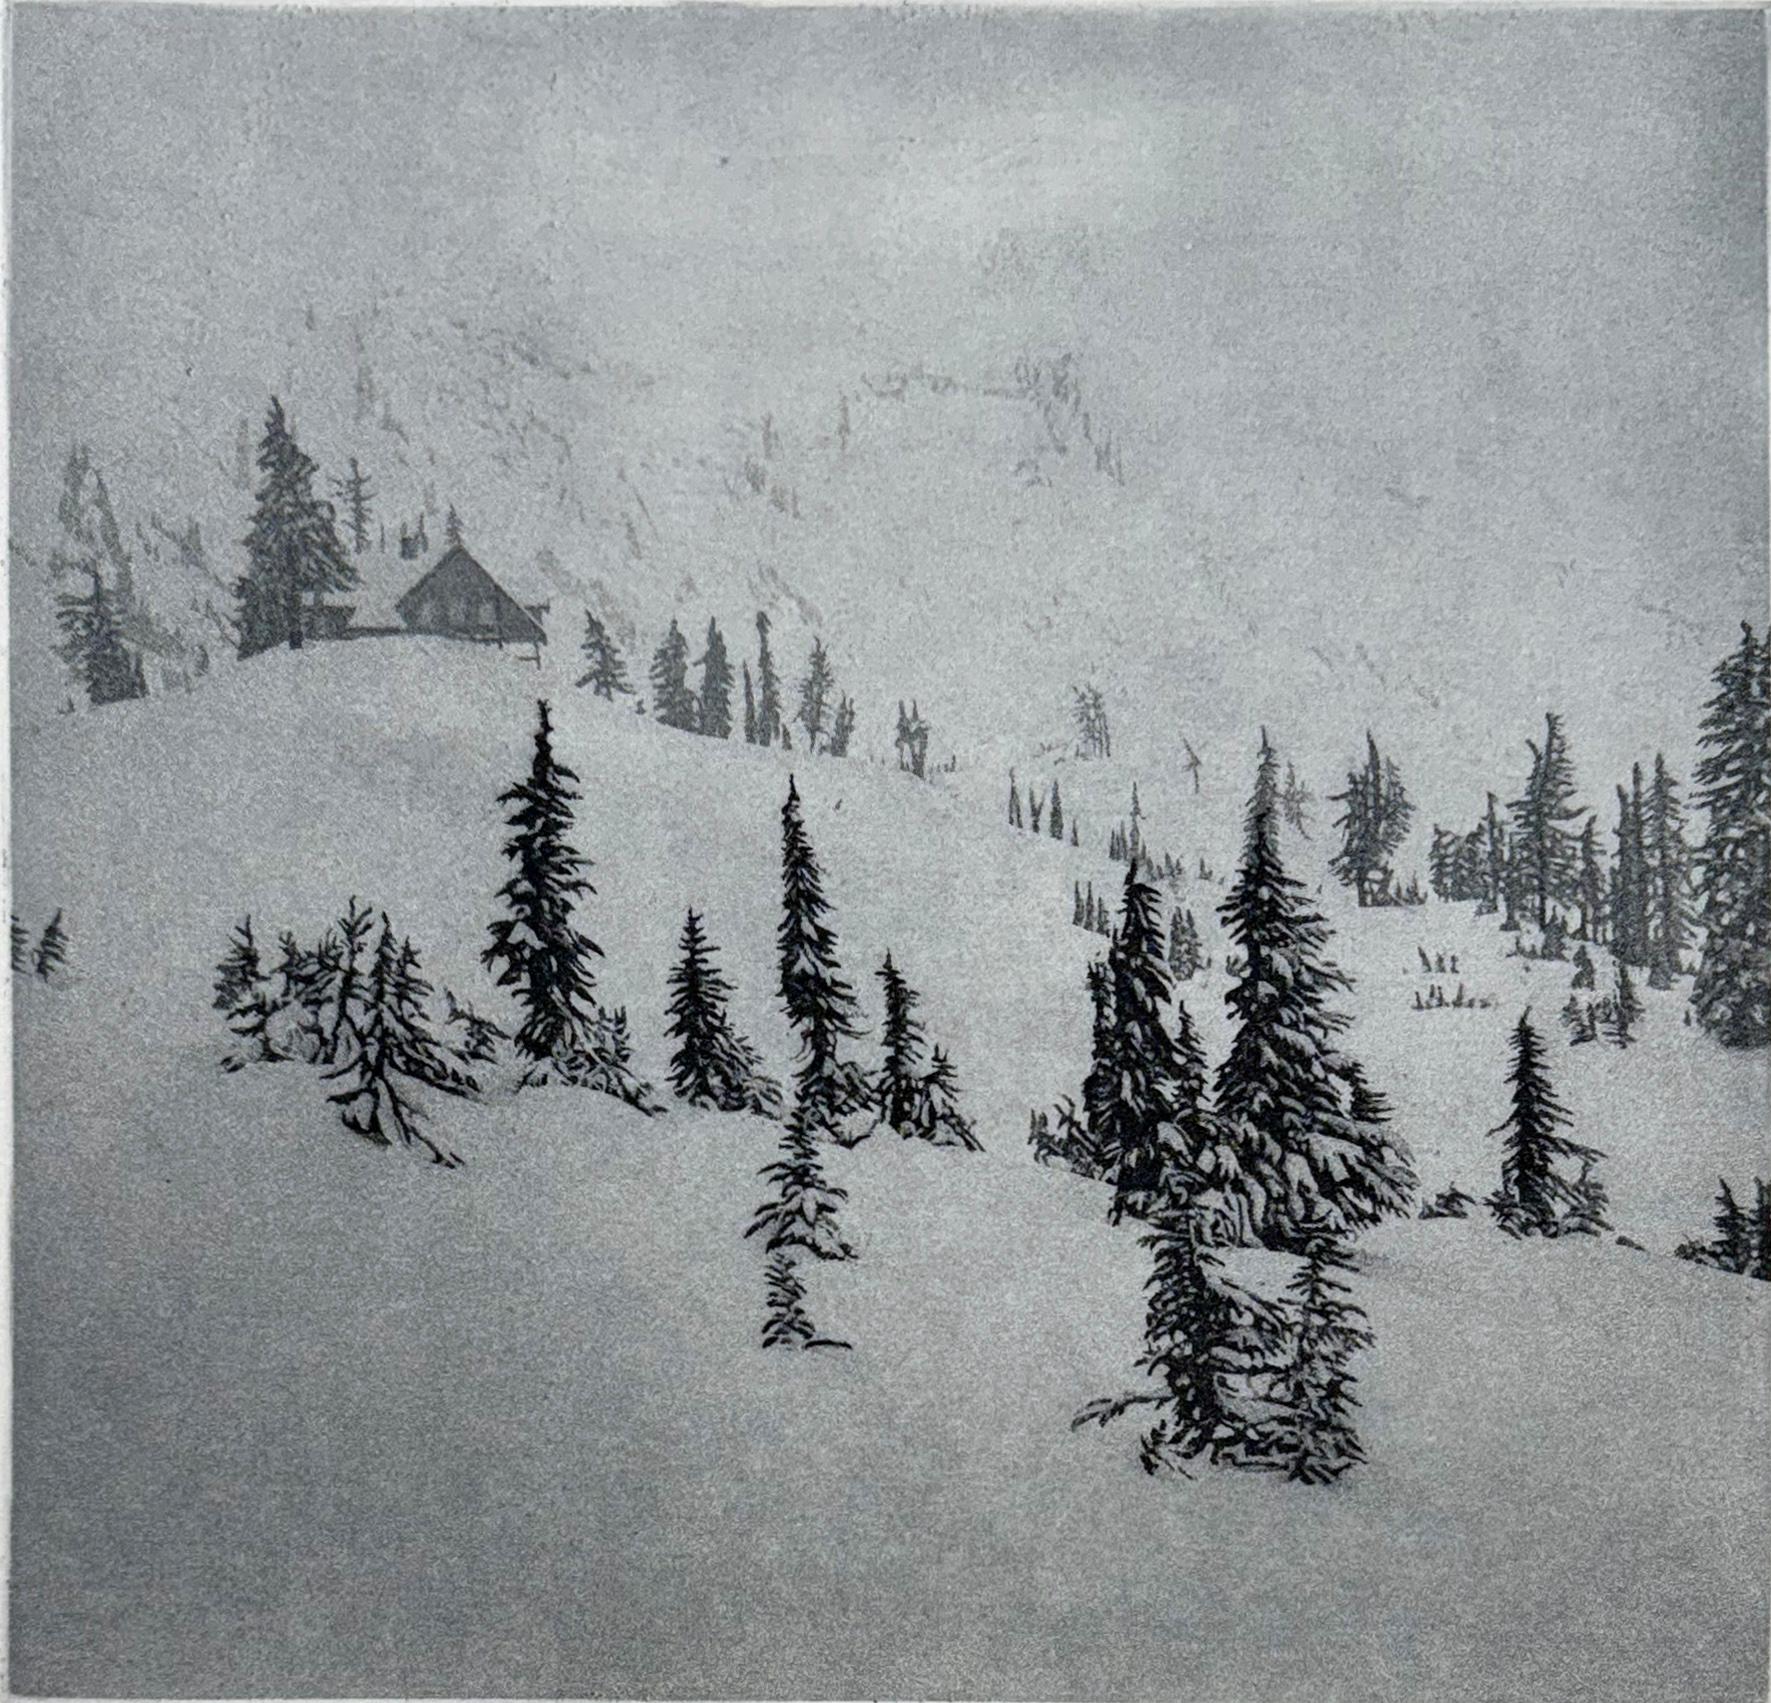 A mountain cabin obscured by mist on a snowy mountain top surrounded by trees. Based on a view of Heather Meadows, Mt Baker Ski Area, WA. Signed titled and numbered in pencil from the edition of 200.

Born in Berkeley, California, on December 21,